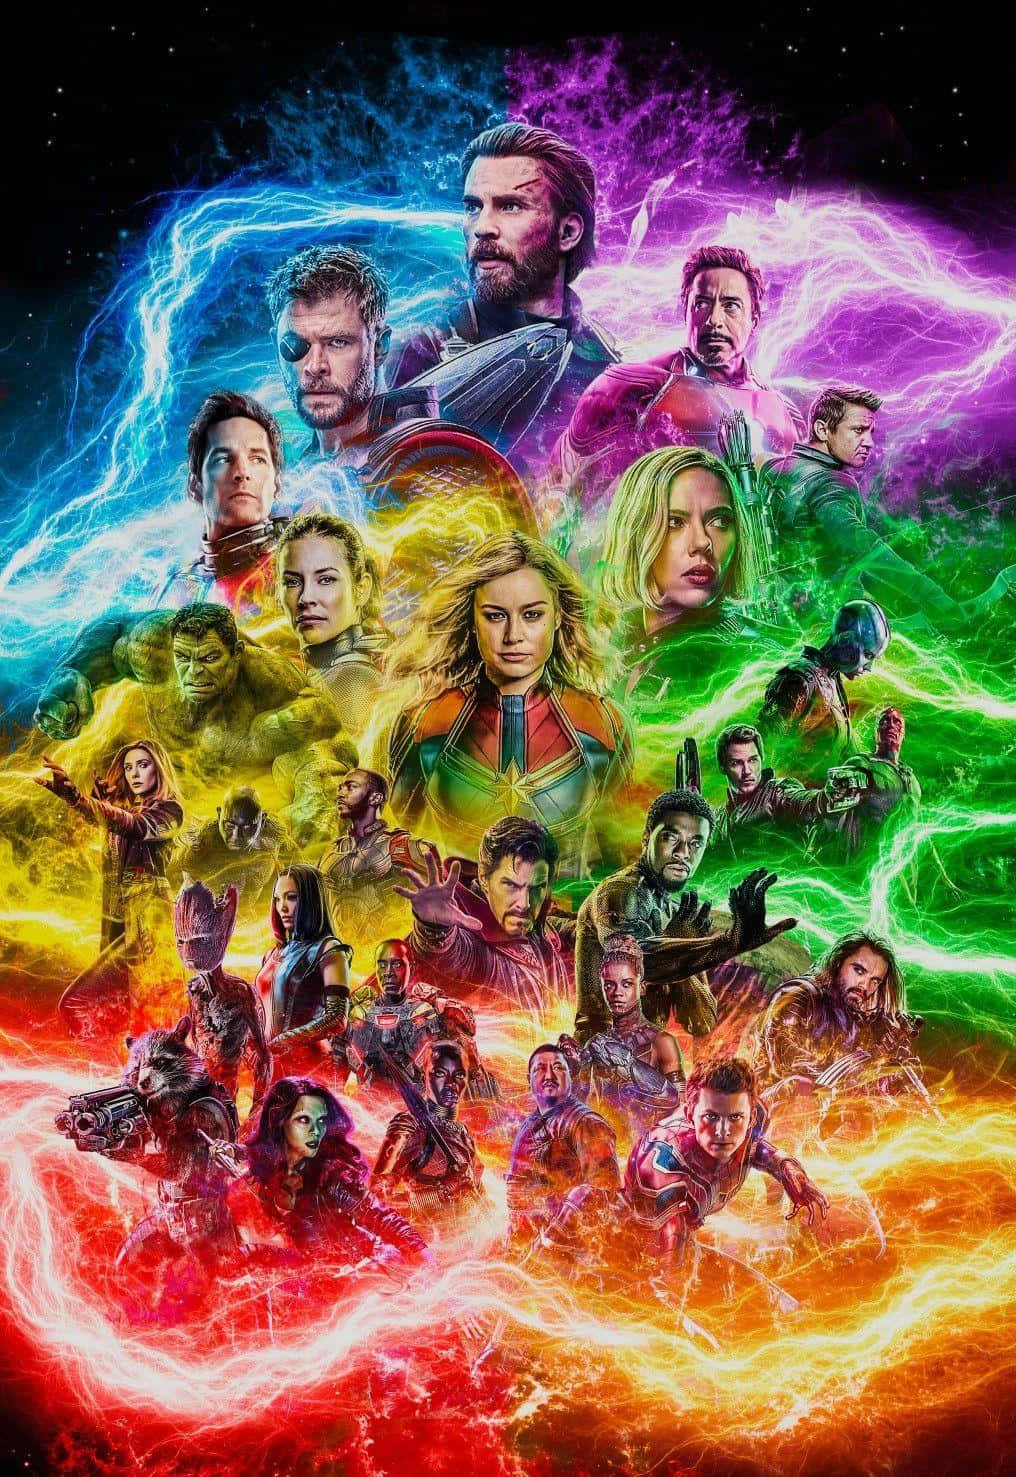 The Avengers Join Forces To Save The Universe in Marvel's Epic Finale - Avengers Endgame